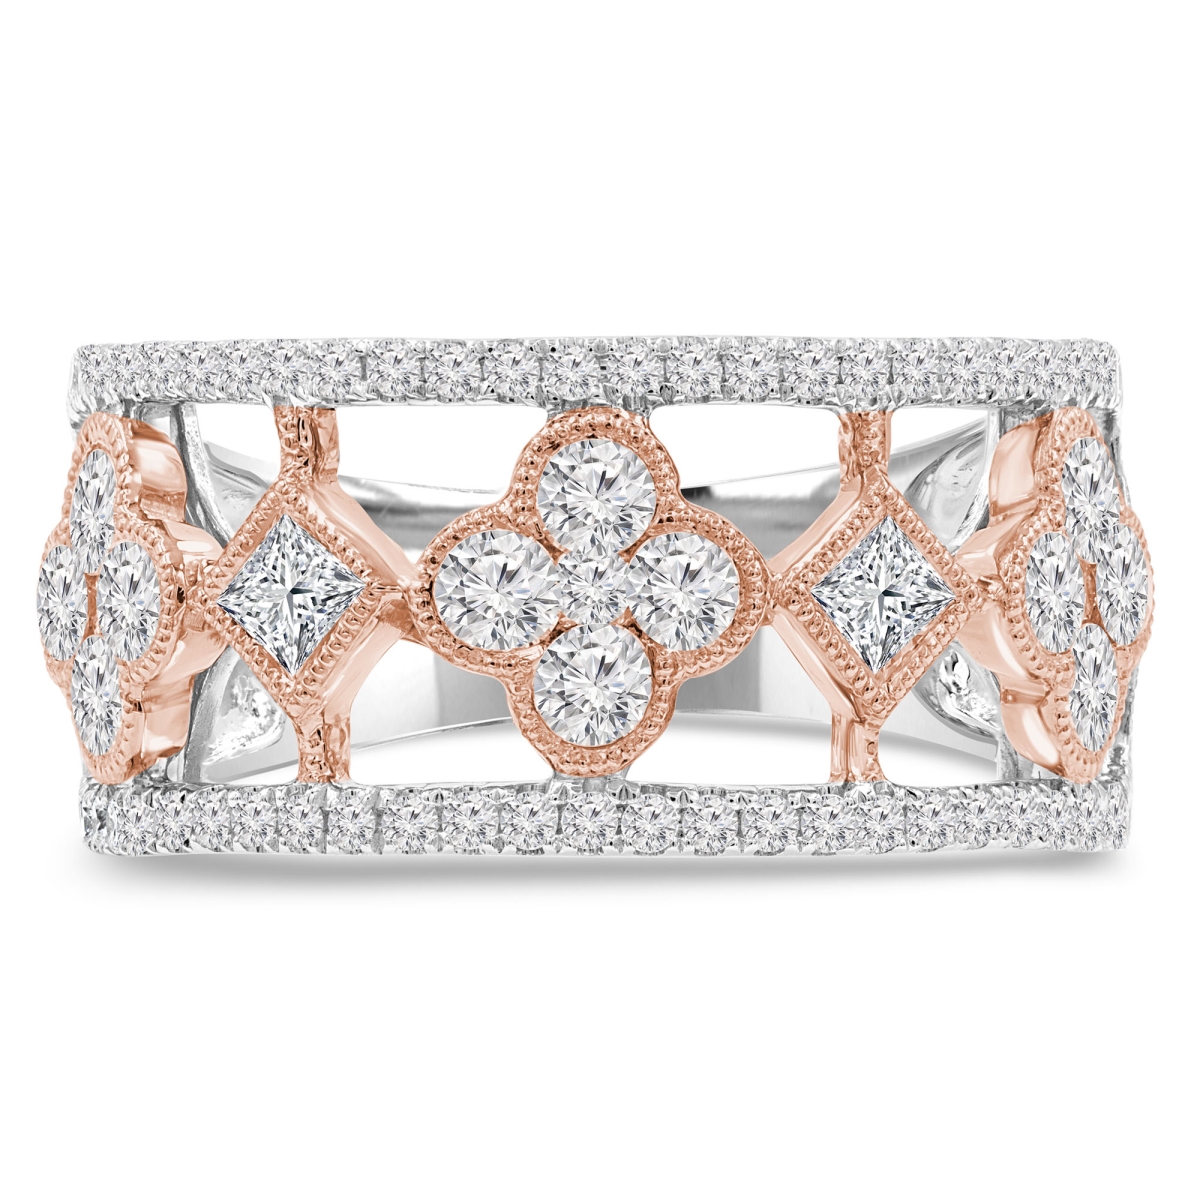 Picture of Majesty Diamonds MDR210138-3 1.13 CTW Princess Diamond Cocktail Ring in 14K Two-Tone Gold - Size 3